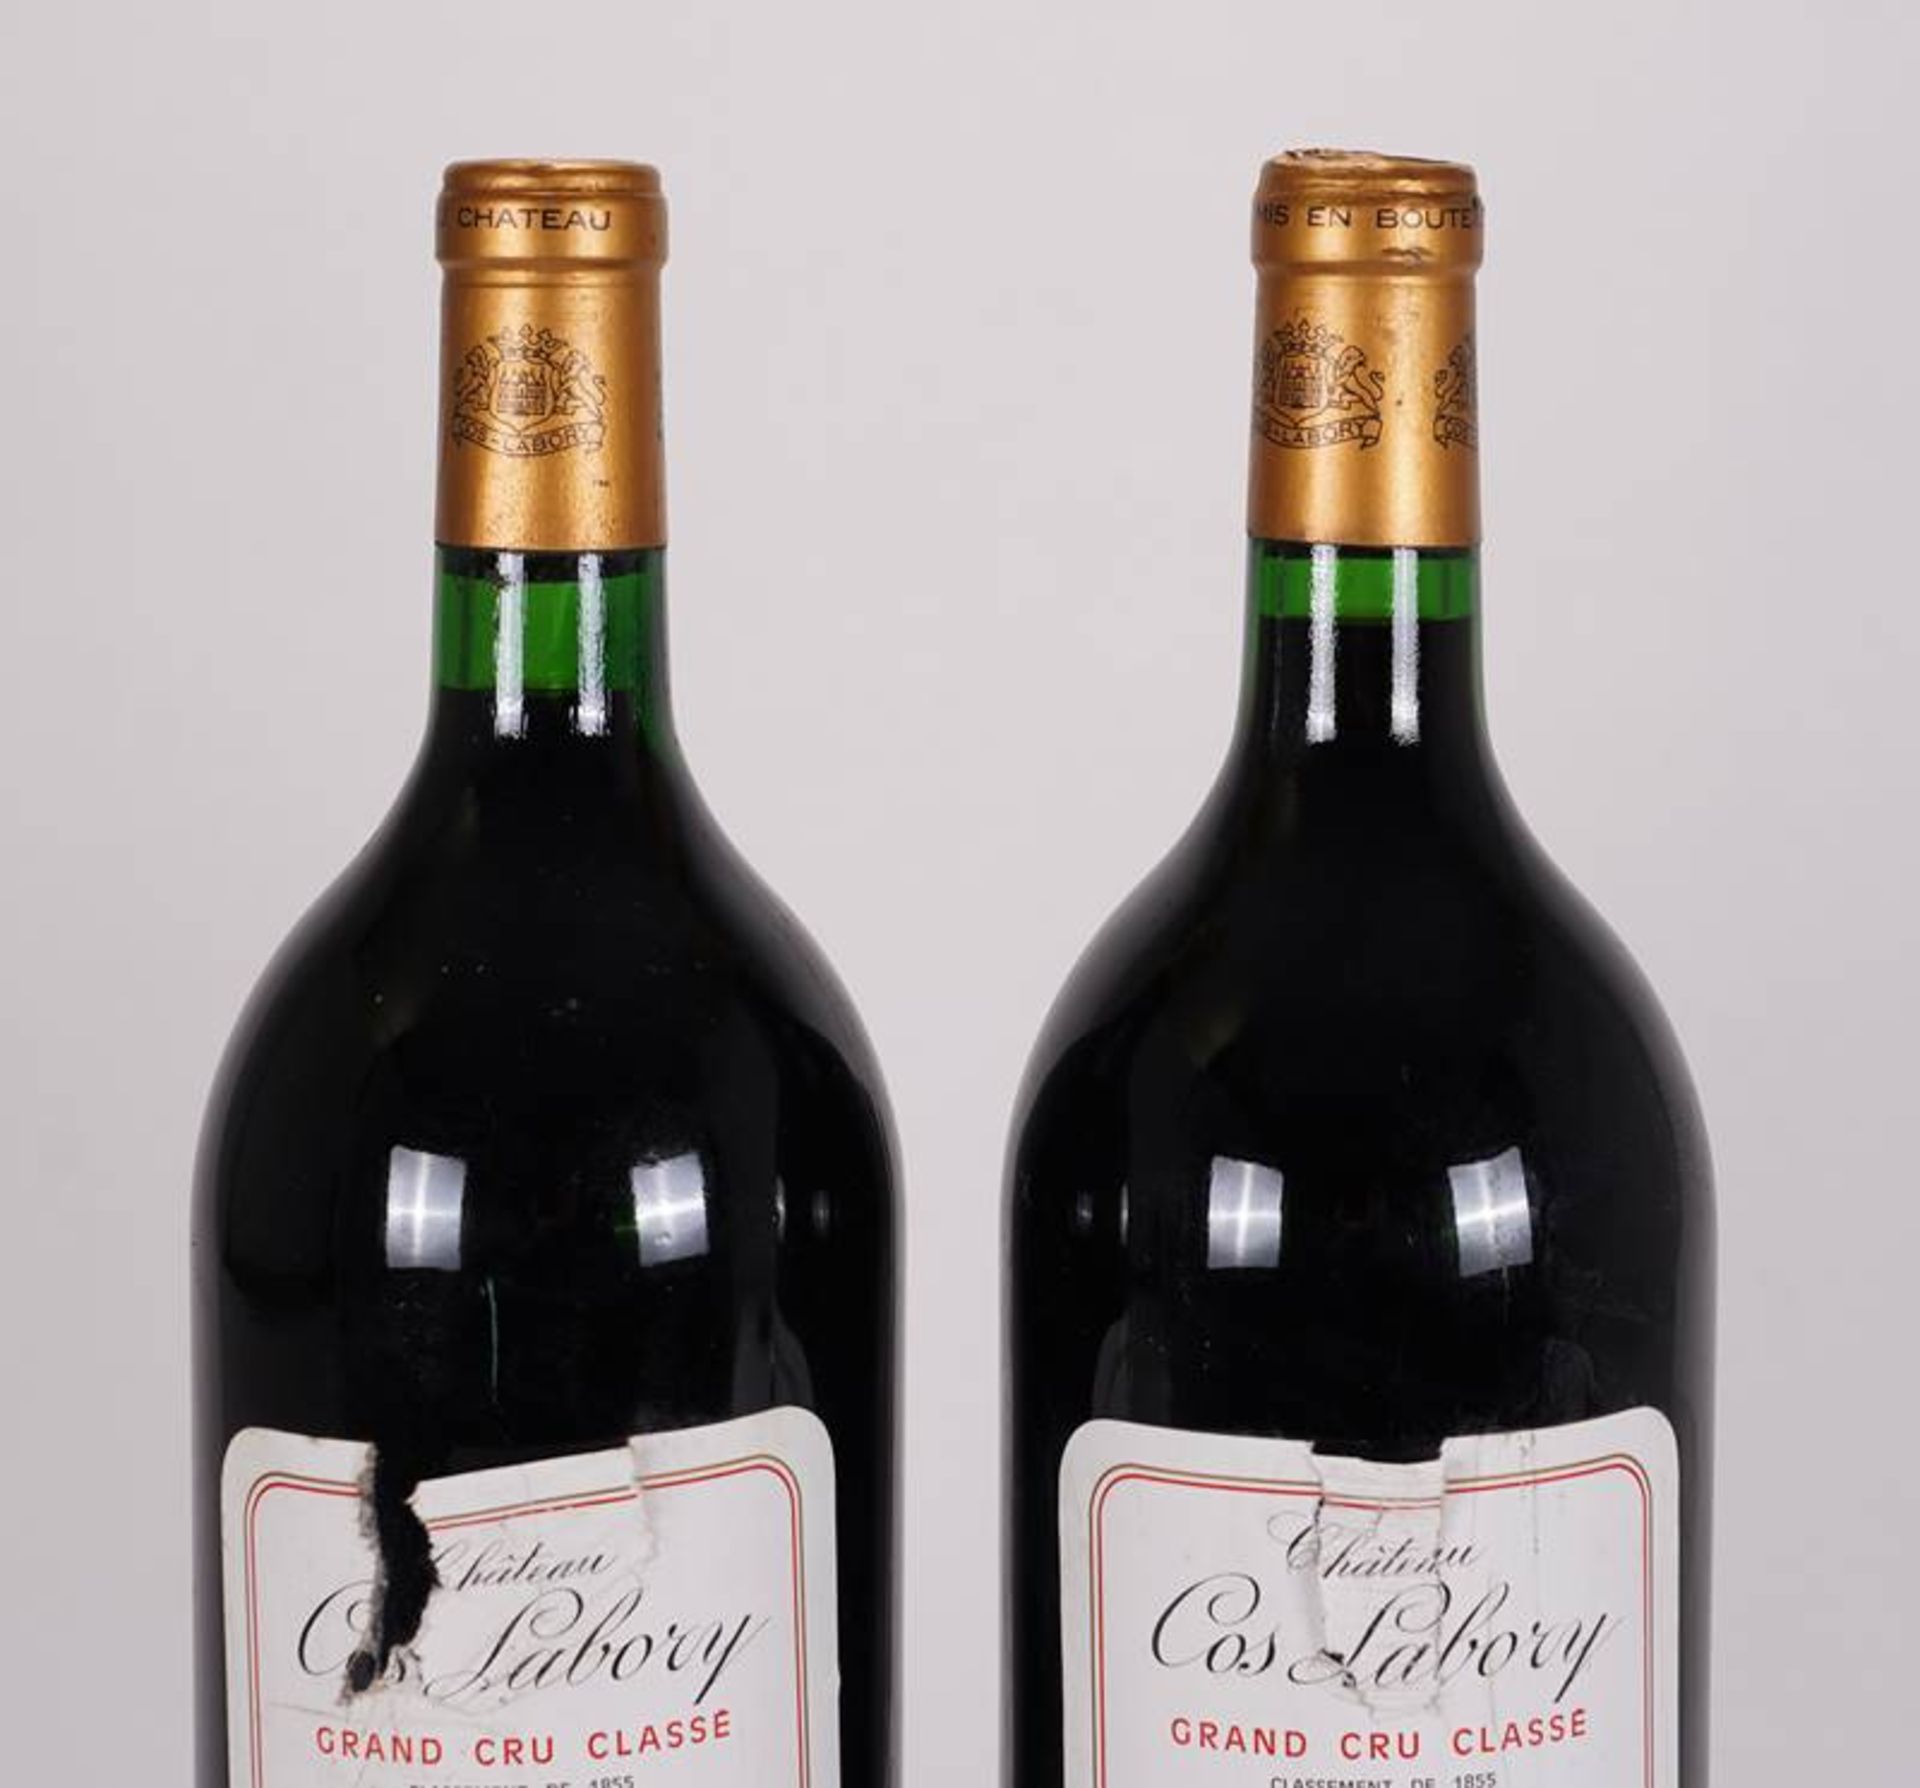 Two magnum bottles Chateau Cos Labory - Image 2 of 4